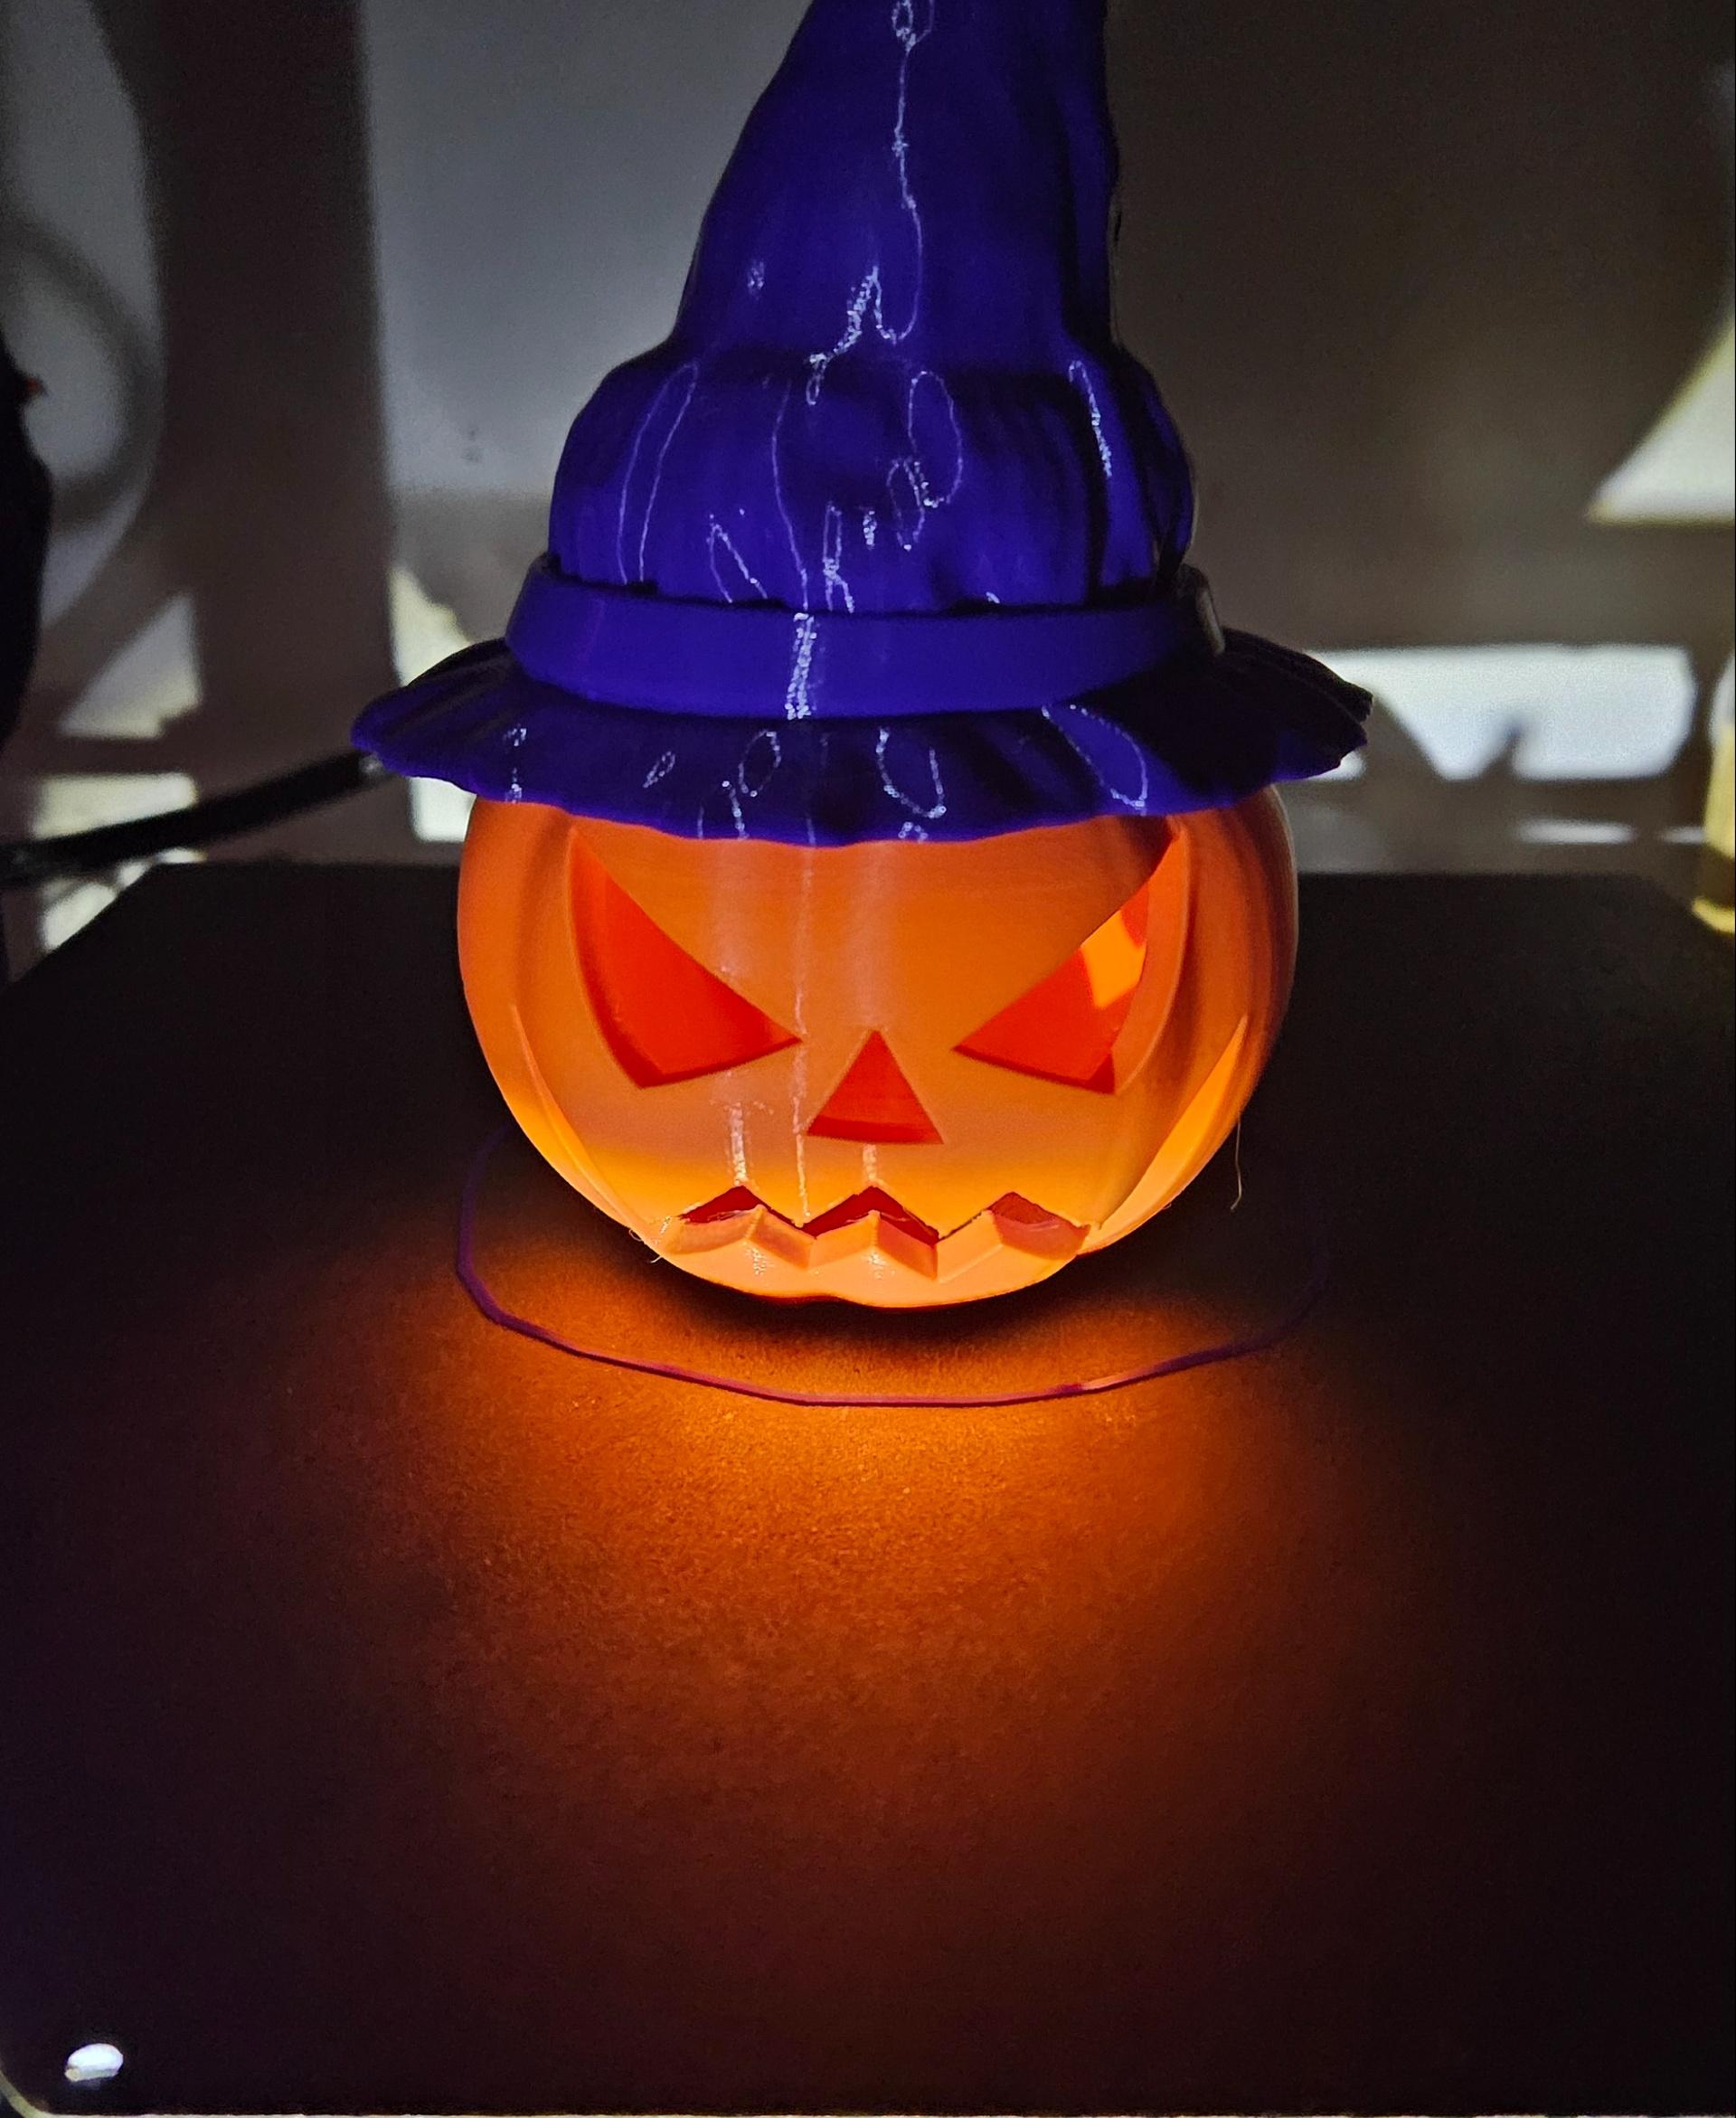 Witch Hat + Pumpkin 🎃 🎃 👻 (multicolor multipart 3mf) - This is my Halloween pumpkin designed by Mel's 3D wearing the purple witches hat printed using my CR10. - 3d model